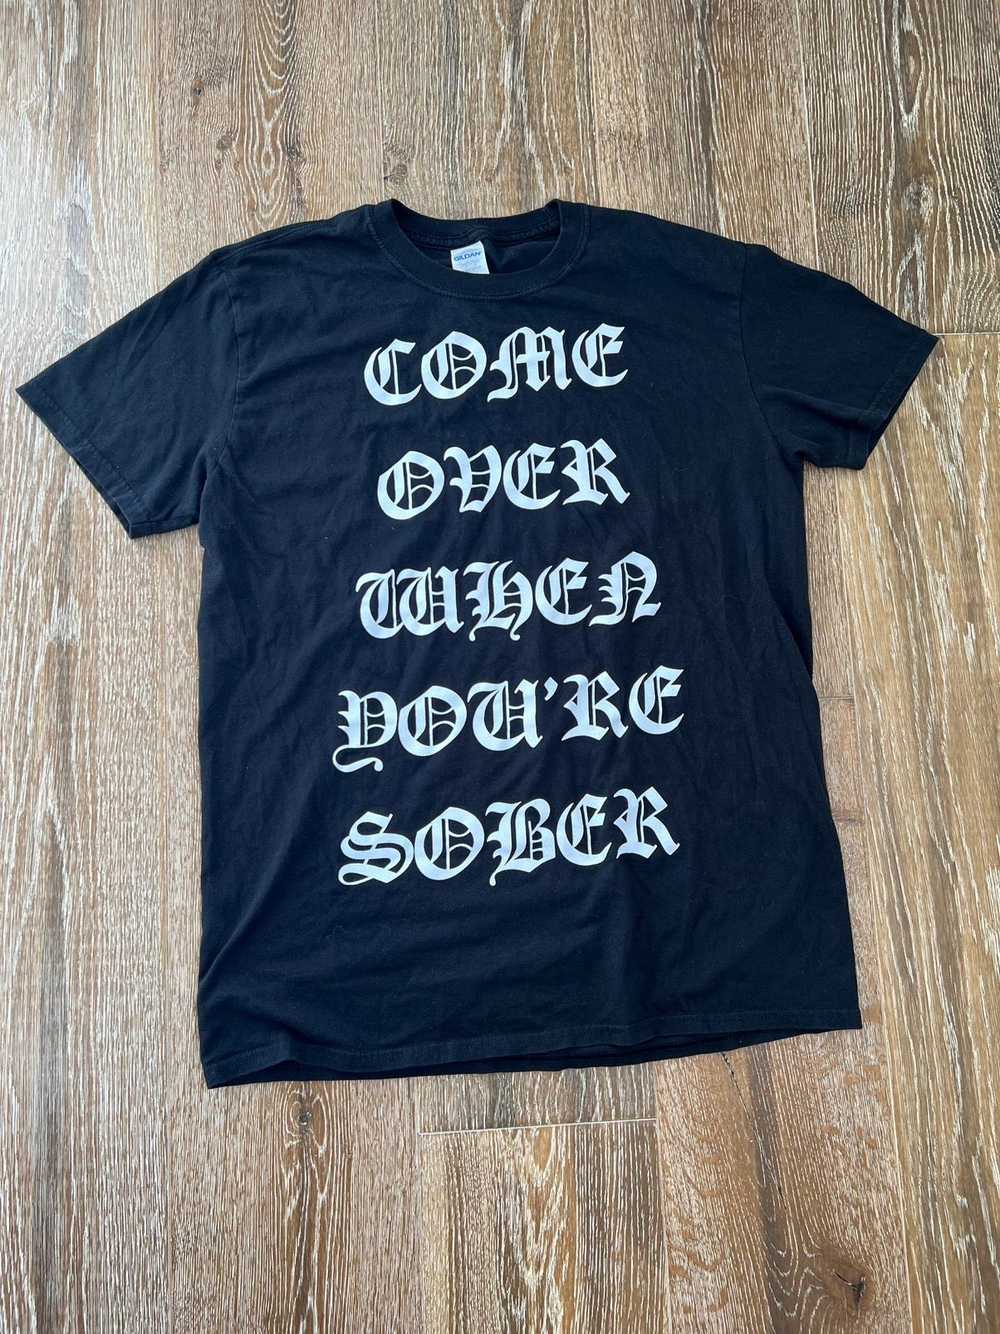 LIL PEEP Lil peep come over when you’re sober tee - image 1